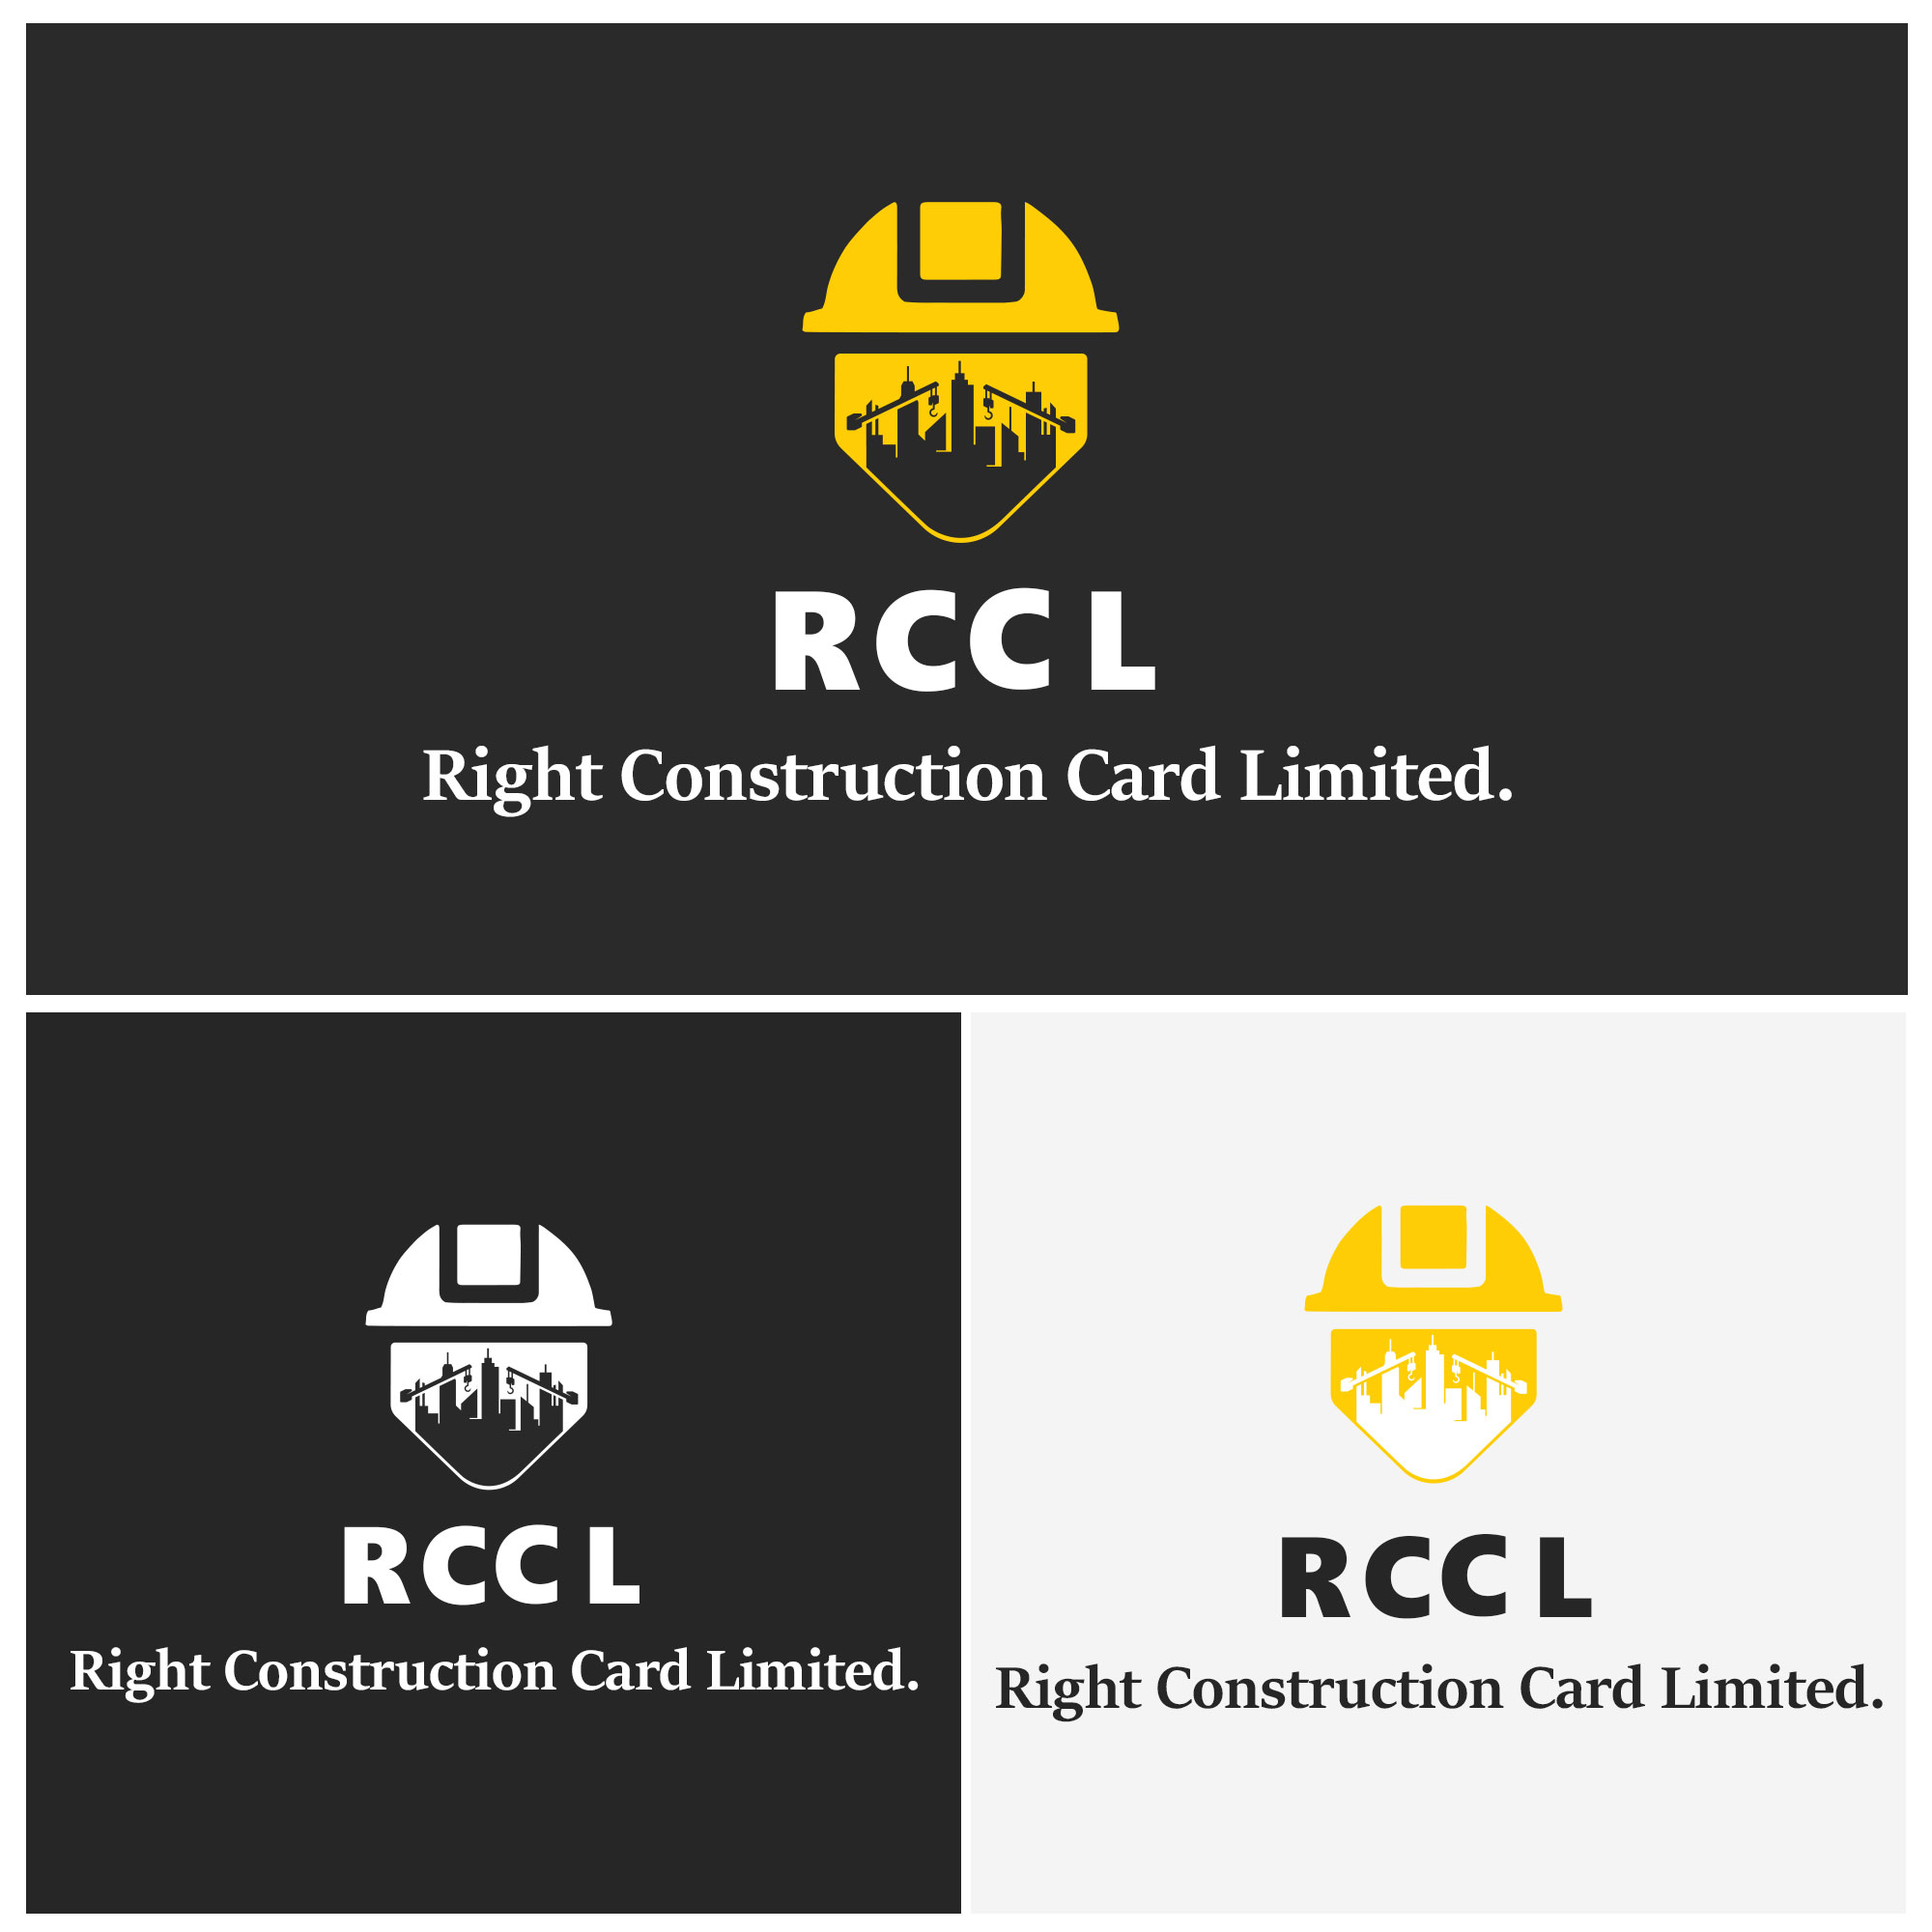 RCCL (Right Construction Card Limited) Logo Designing